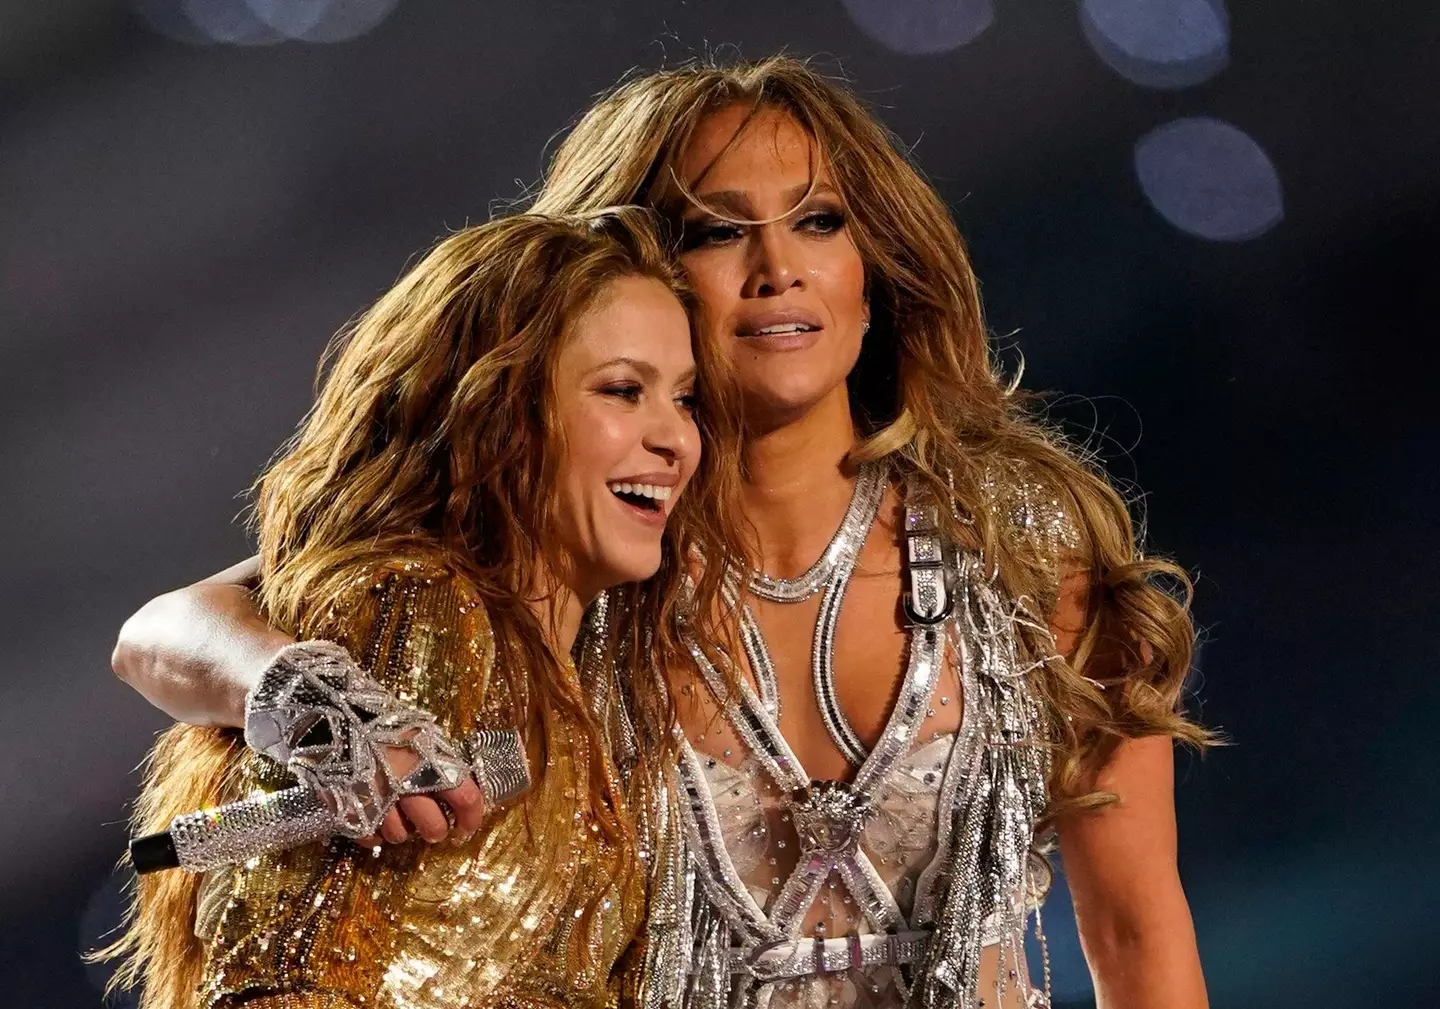 The singer said she regretted her Super Bowl performance with Shakira.